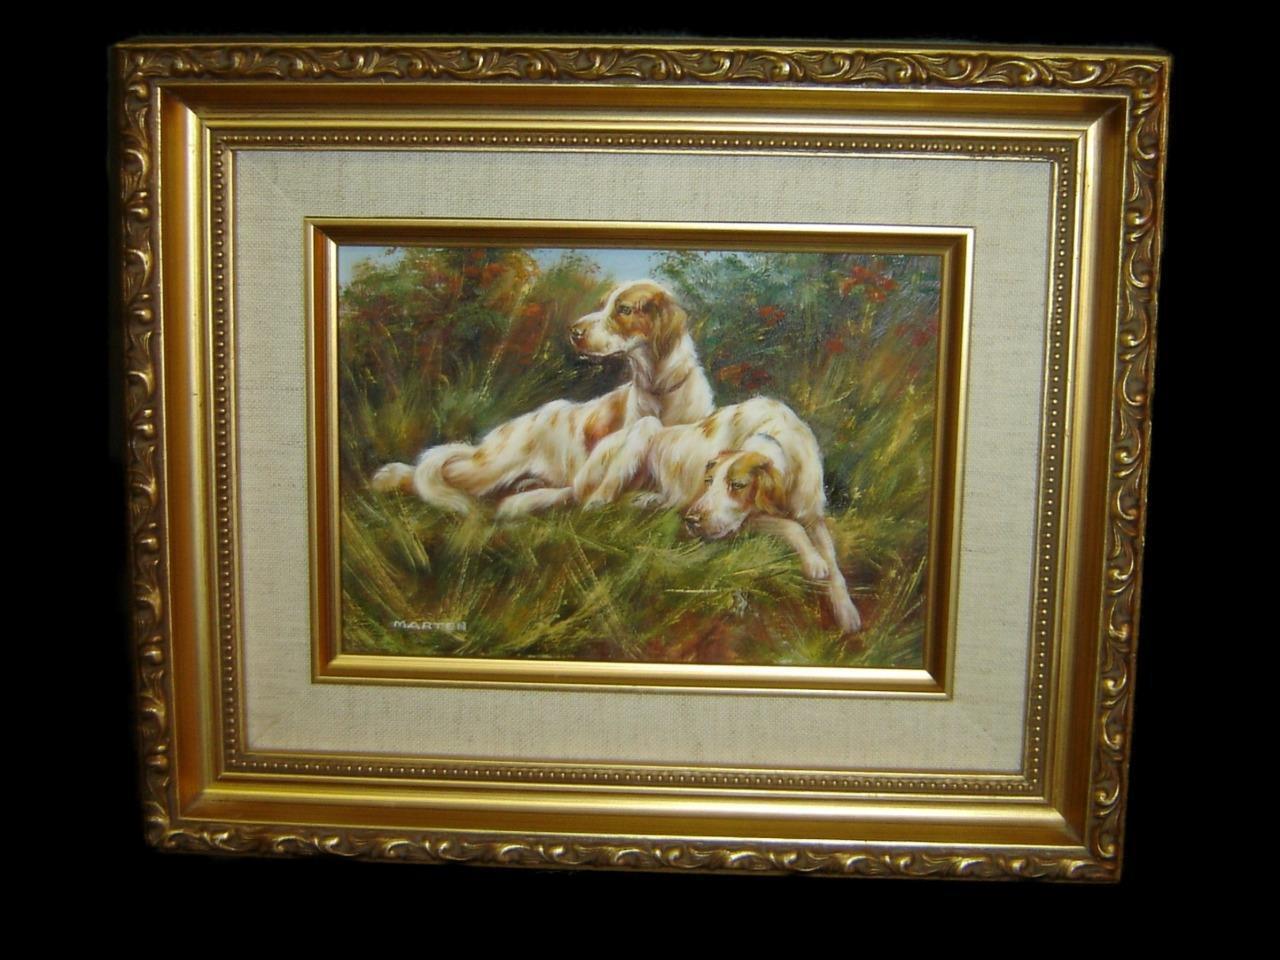 Antique Pair Of English Red And White Dog Setters Oil Painting By Elliot Marten.